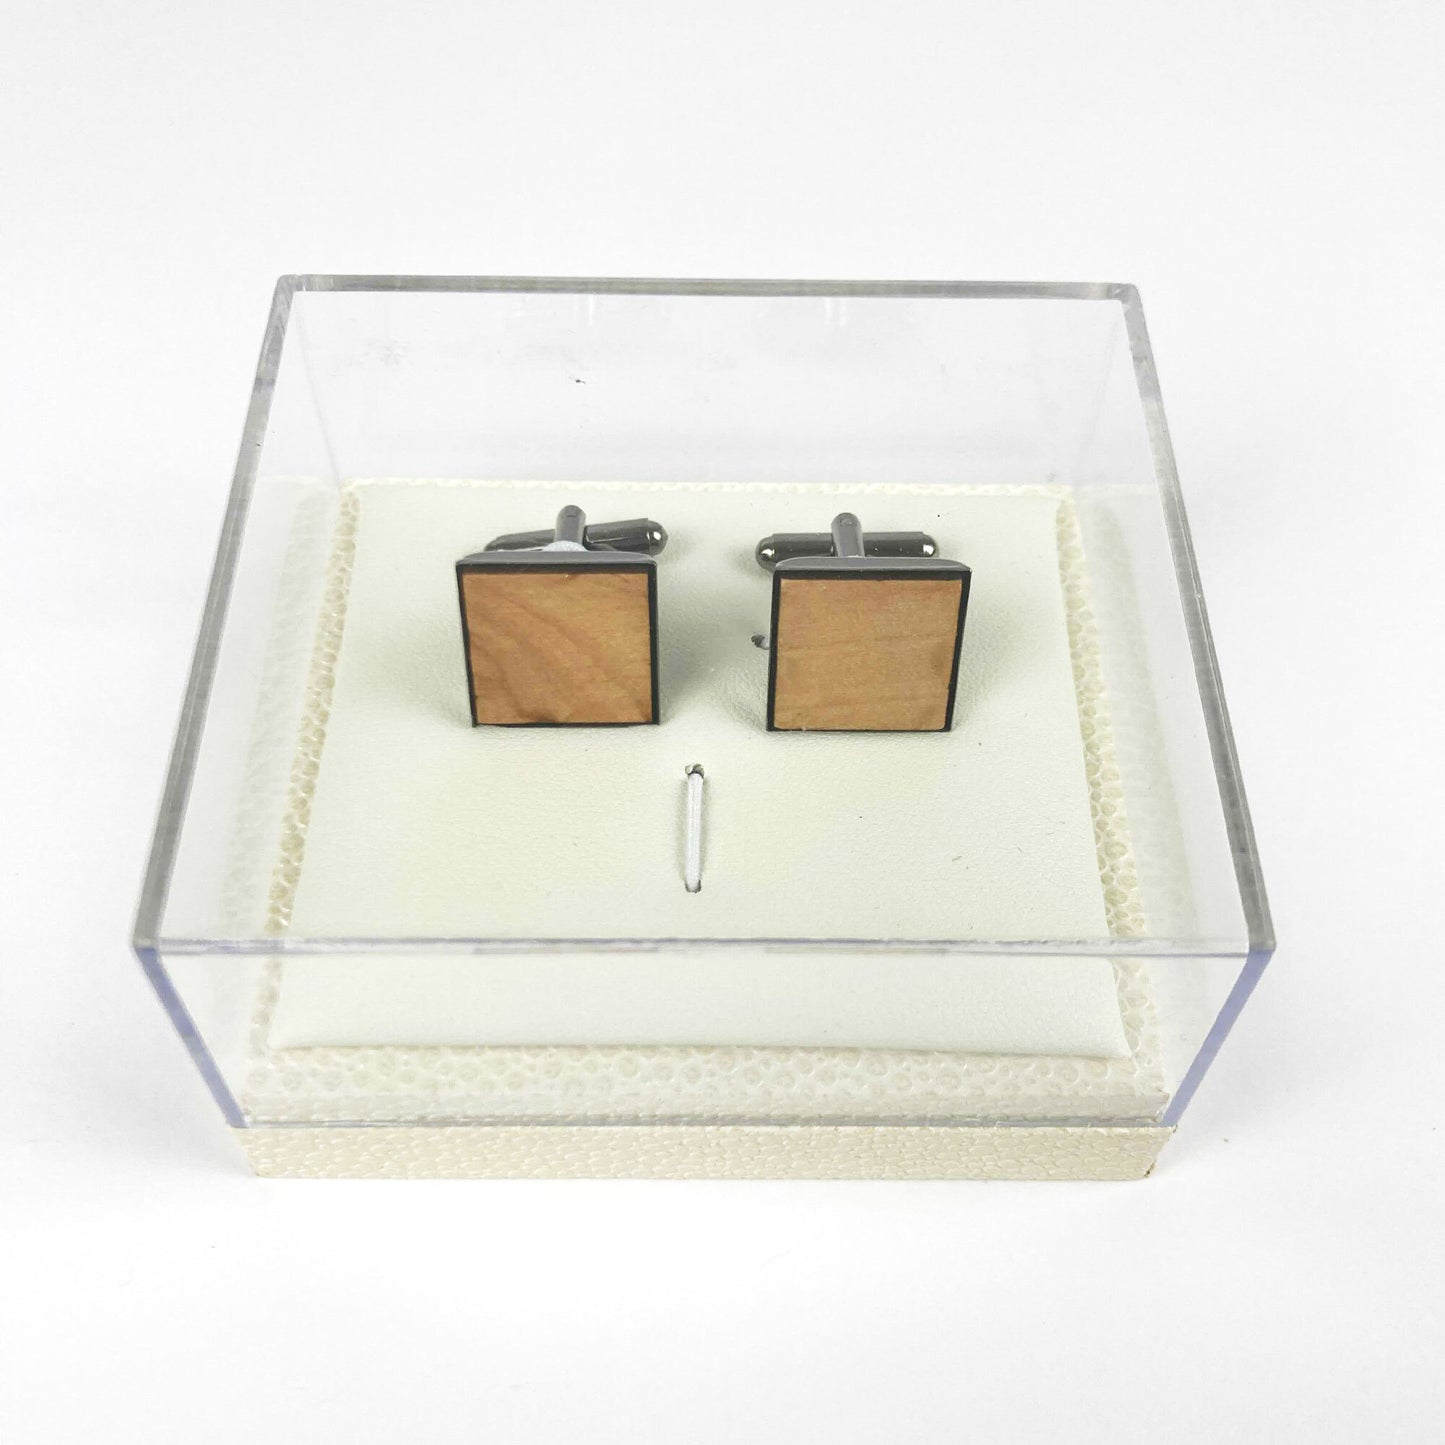 Meet me at the Altar Square Wooden Cufflinks Time & Date